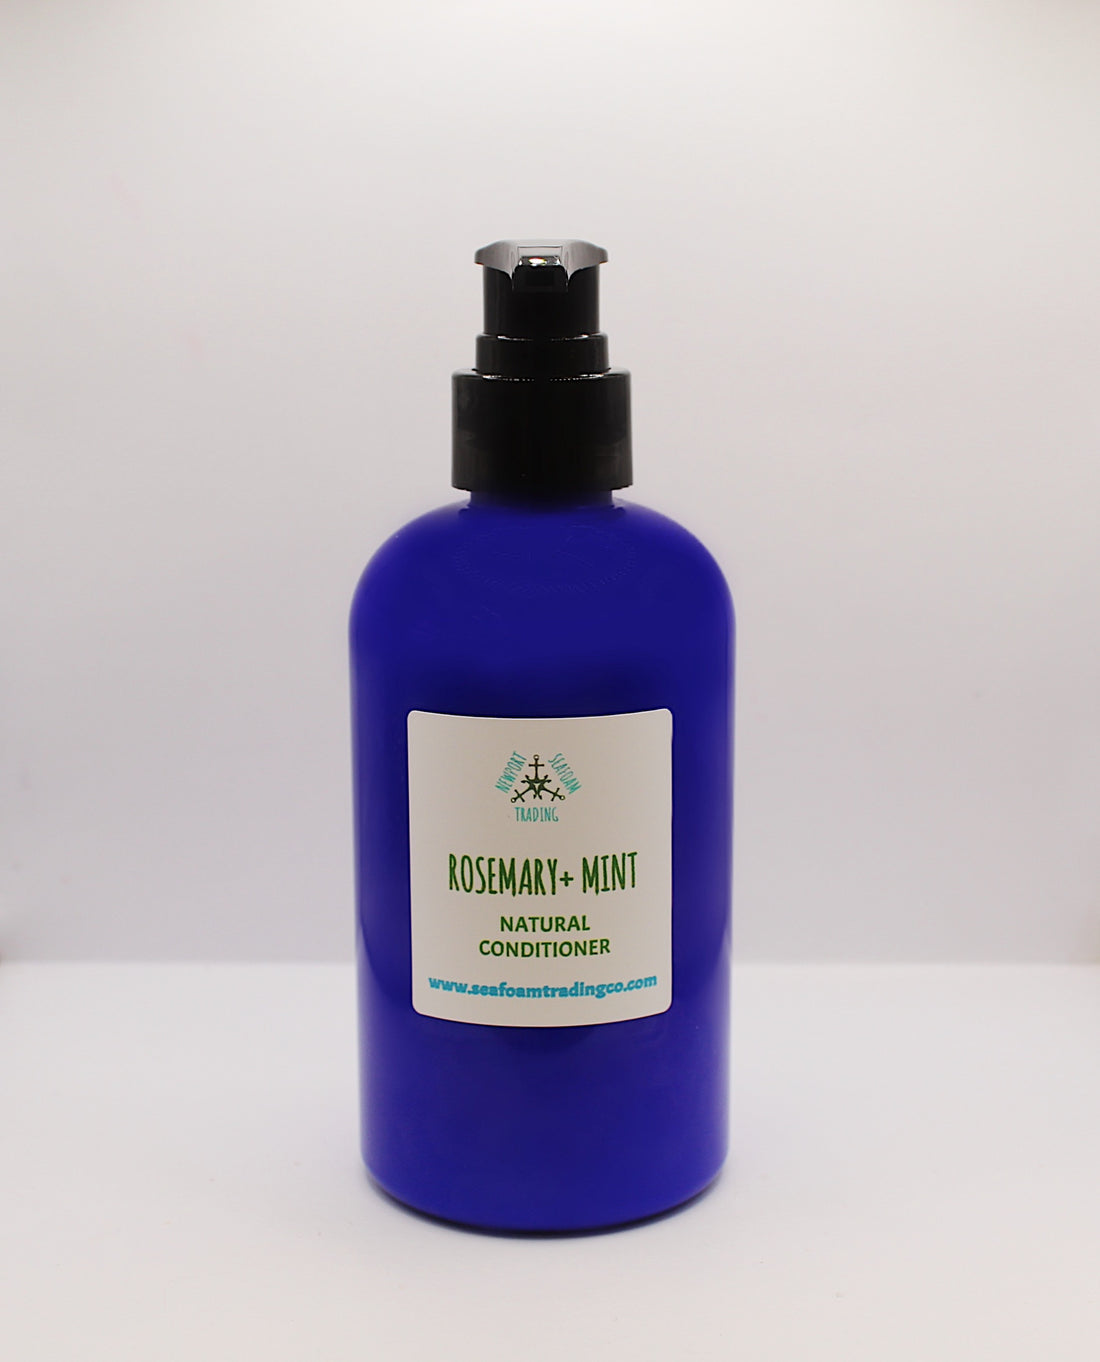 Rosemary + Mint Natural Conditioner